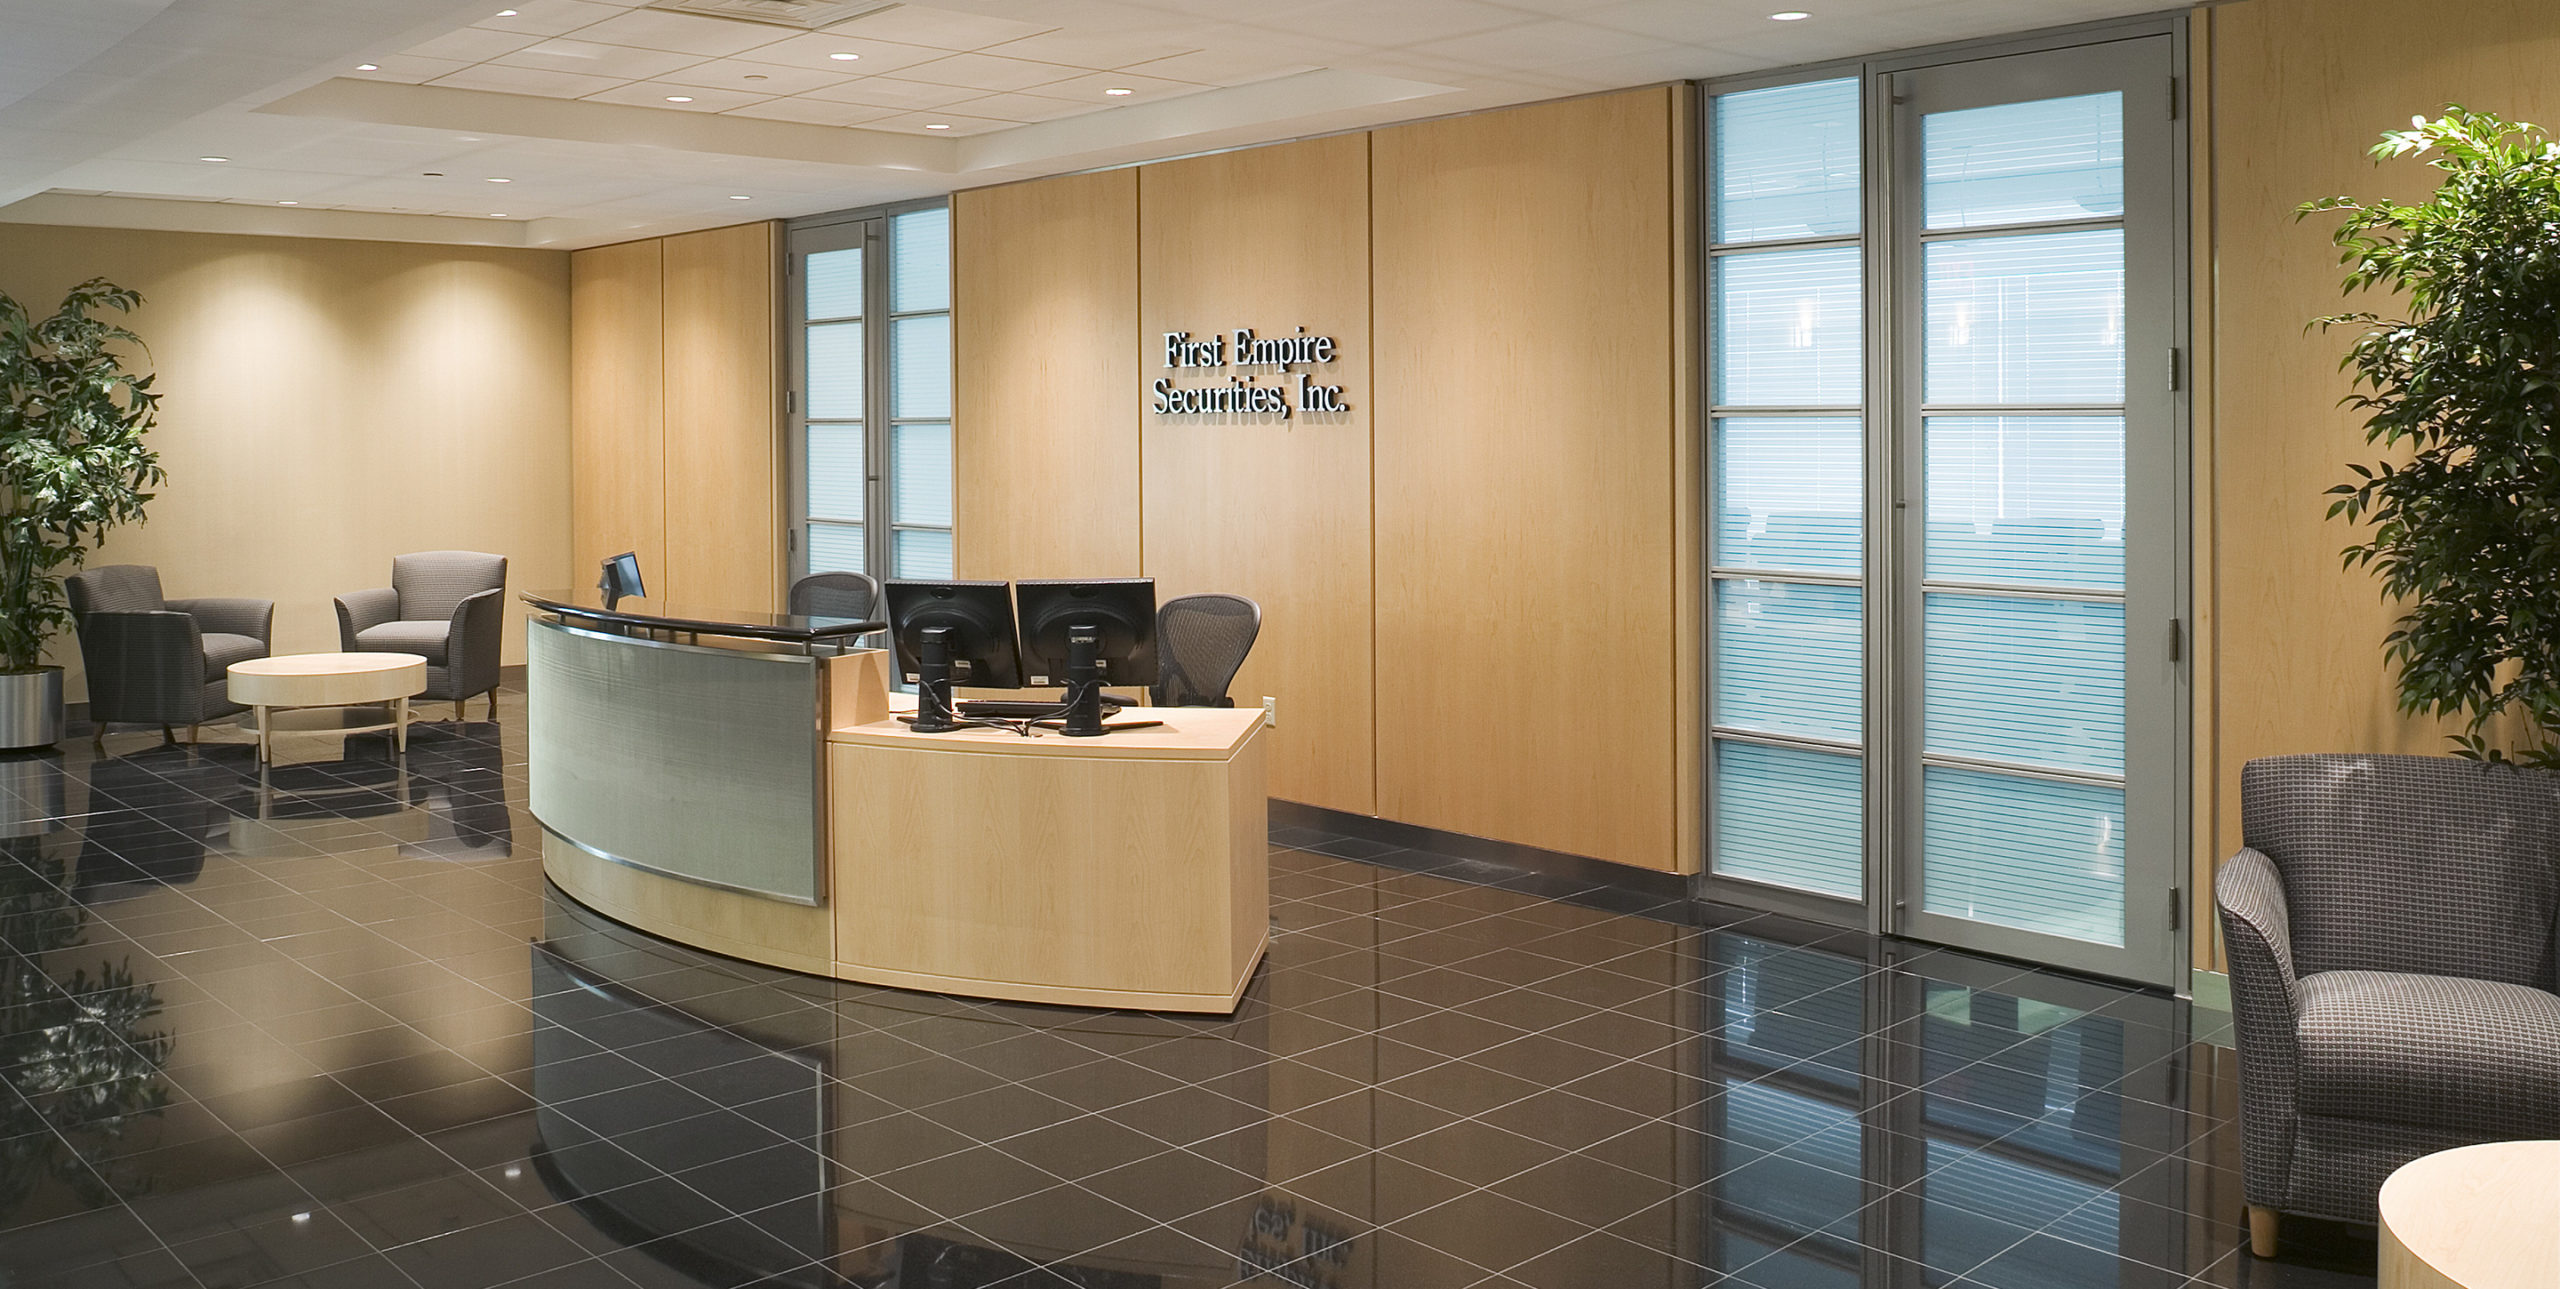 Lobby and front desk reception at First Empire Securities at 100 Motor Parkway, Hauppauge